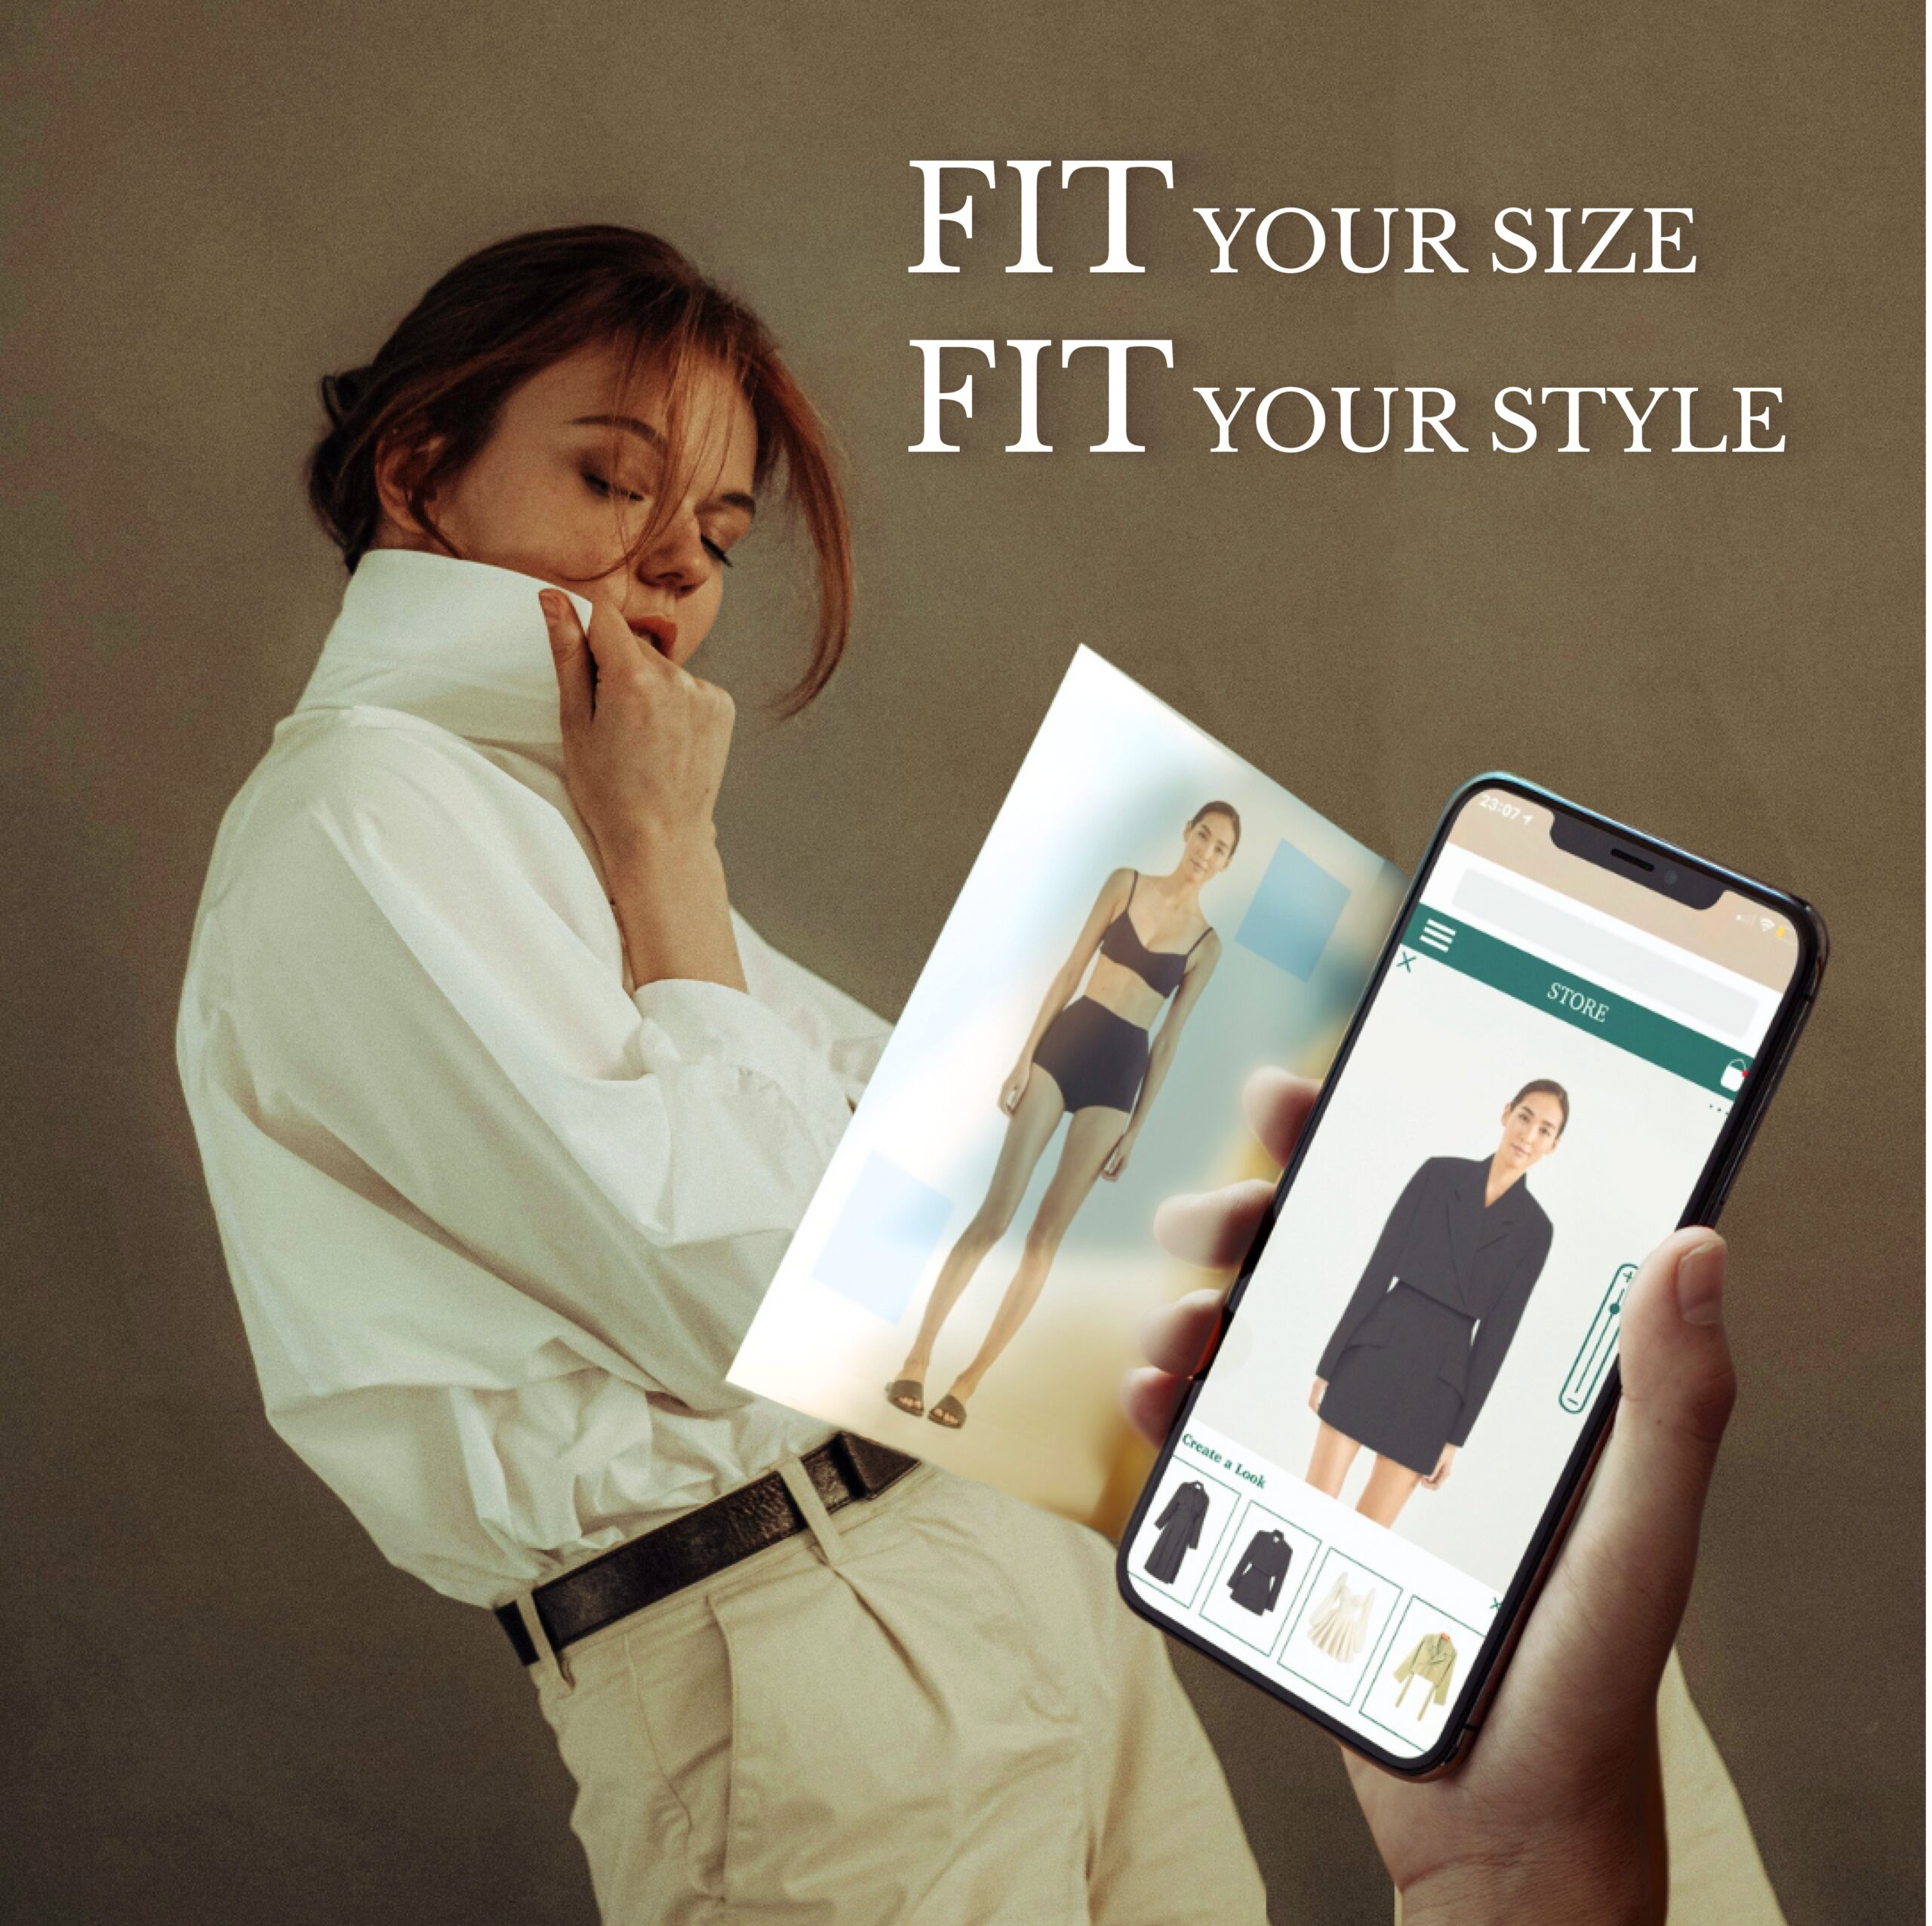 fit your size, fit your style